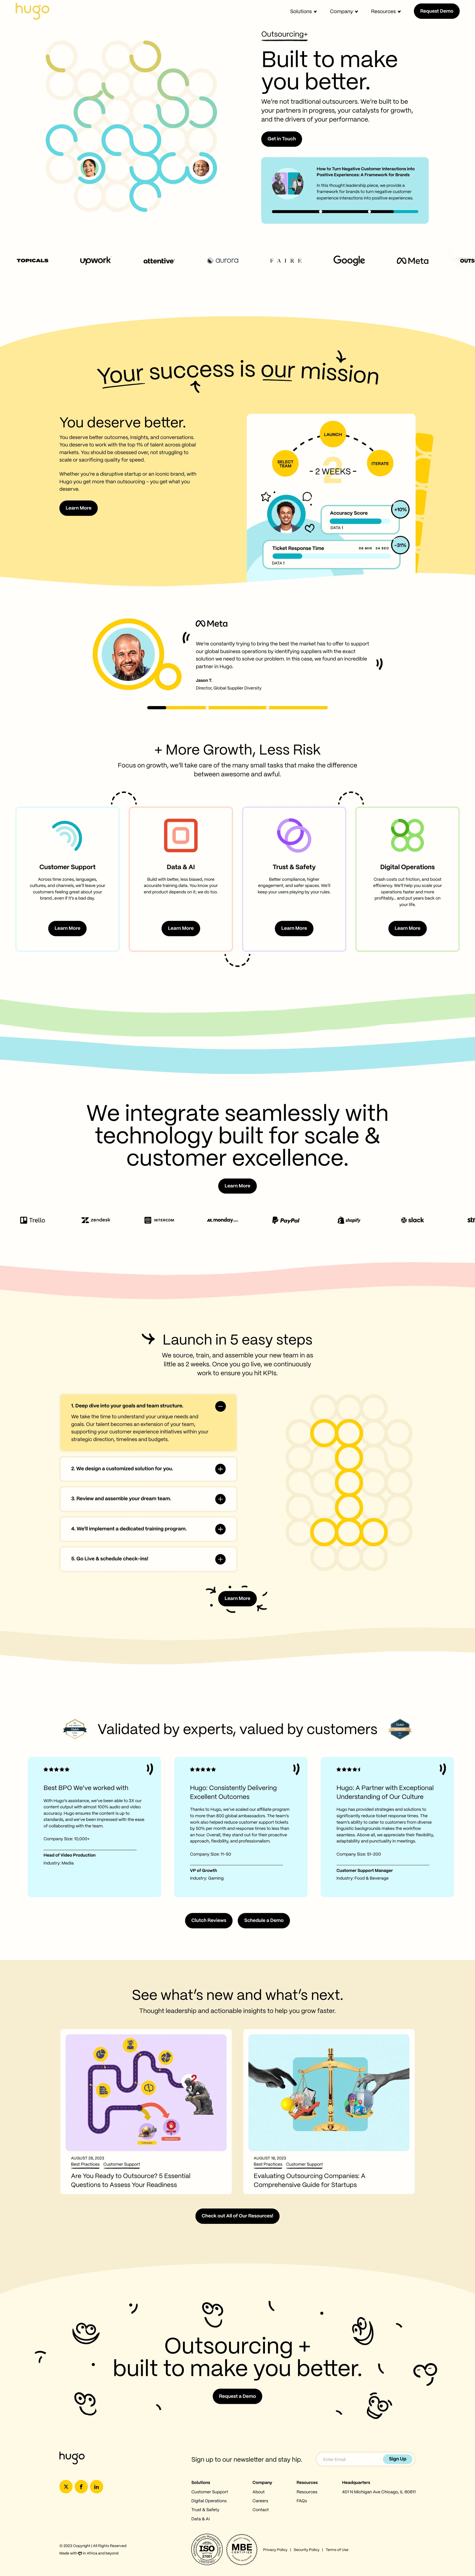 Hugo Landing Page Example: Built to make you better. We’re not traditional outsourcers. We’re built to be your partners in progress, your catalysts for growth, and the drivers of your performance.